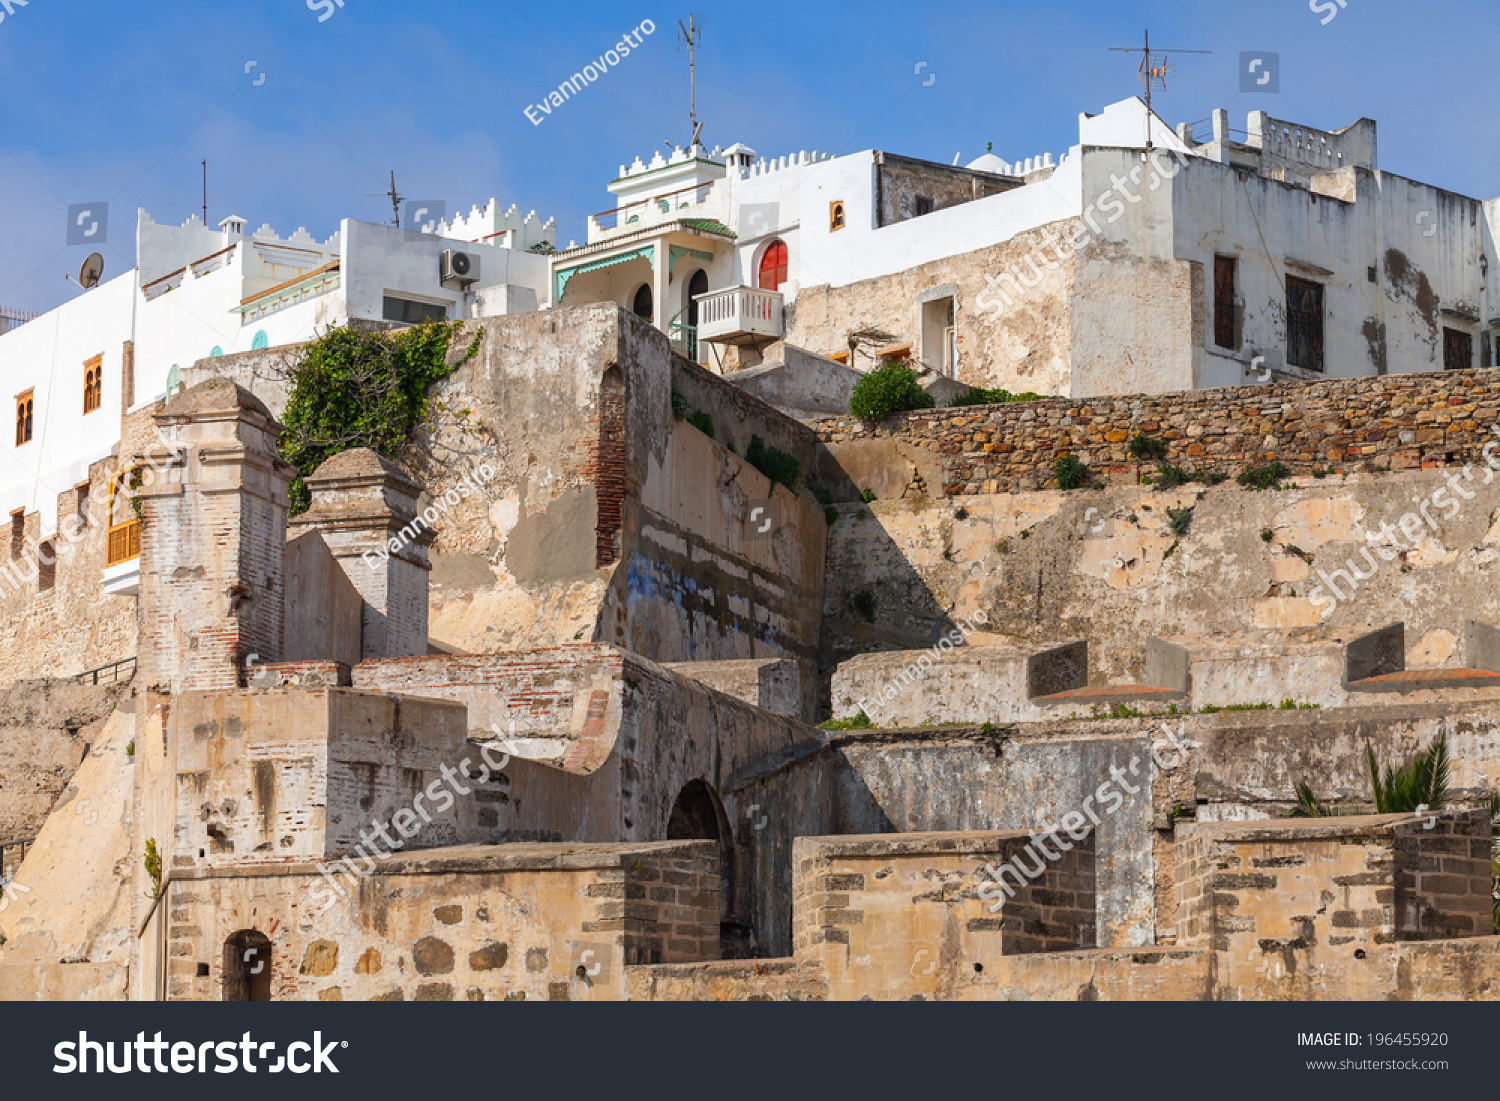 Ancient fortress and living houses in Medina, old Tangier, Morocco #196455920